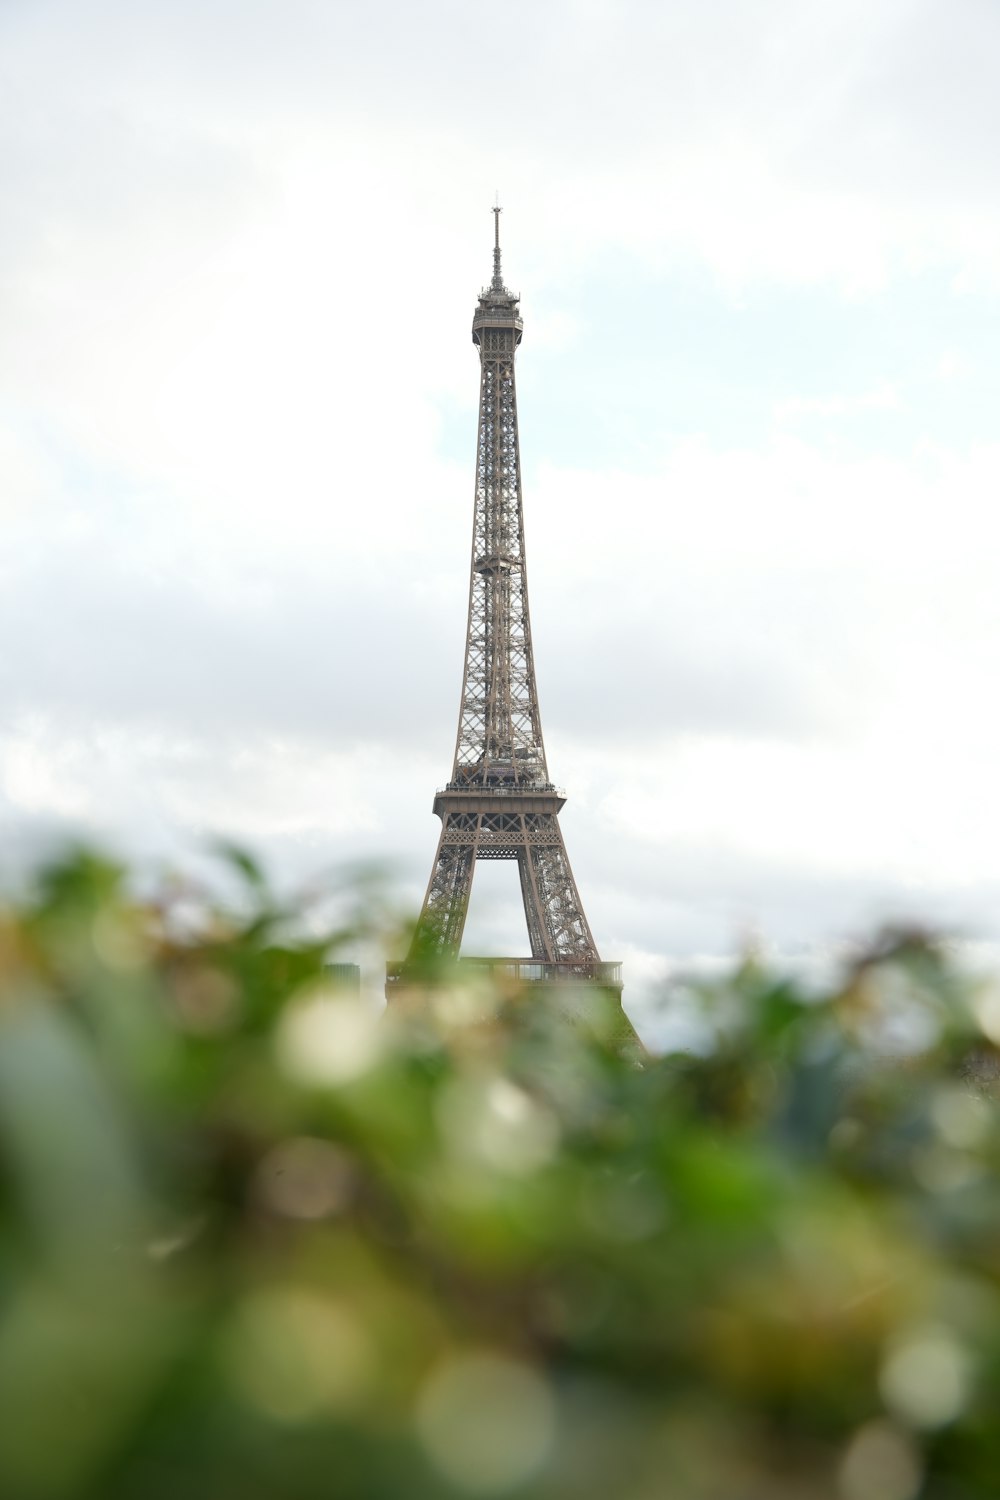 a view of the eiffel tower from a distance